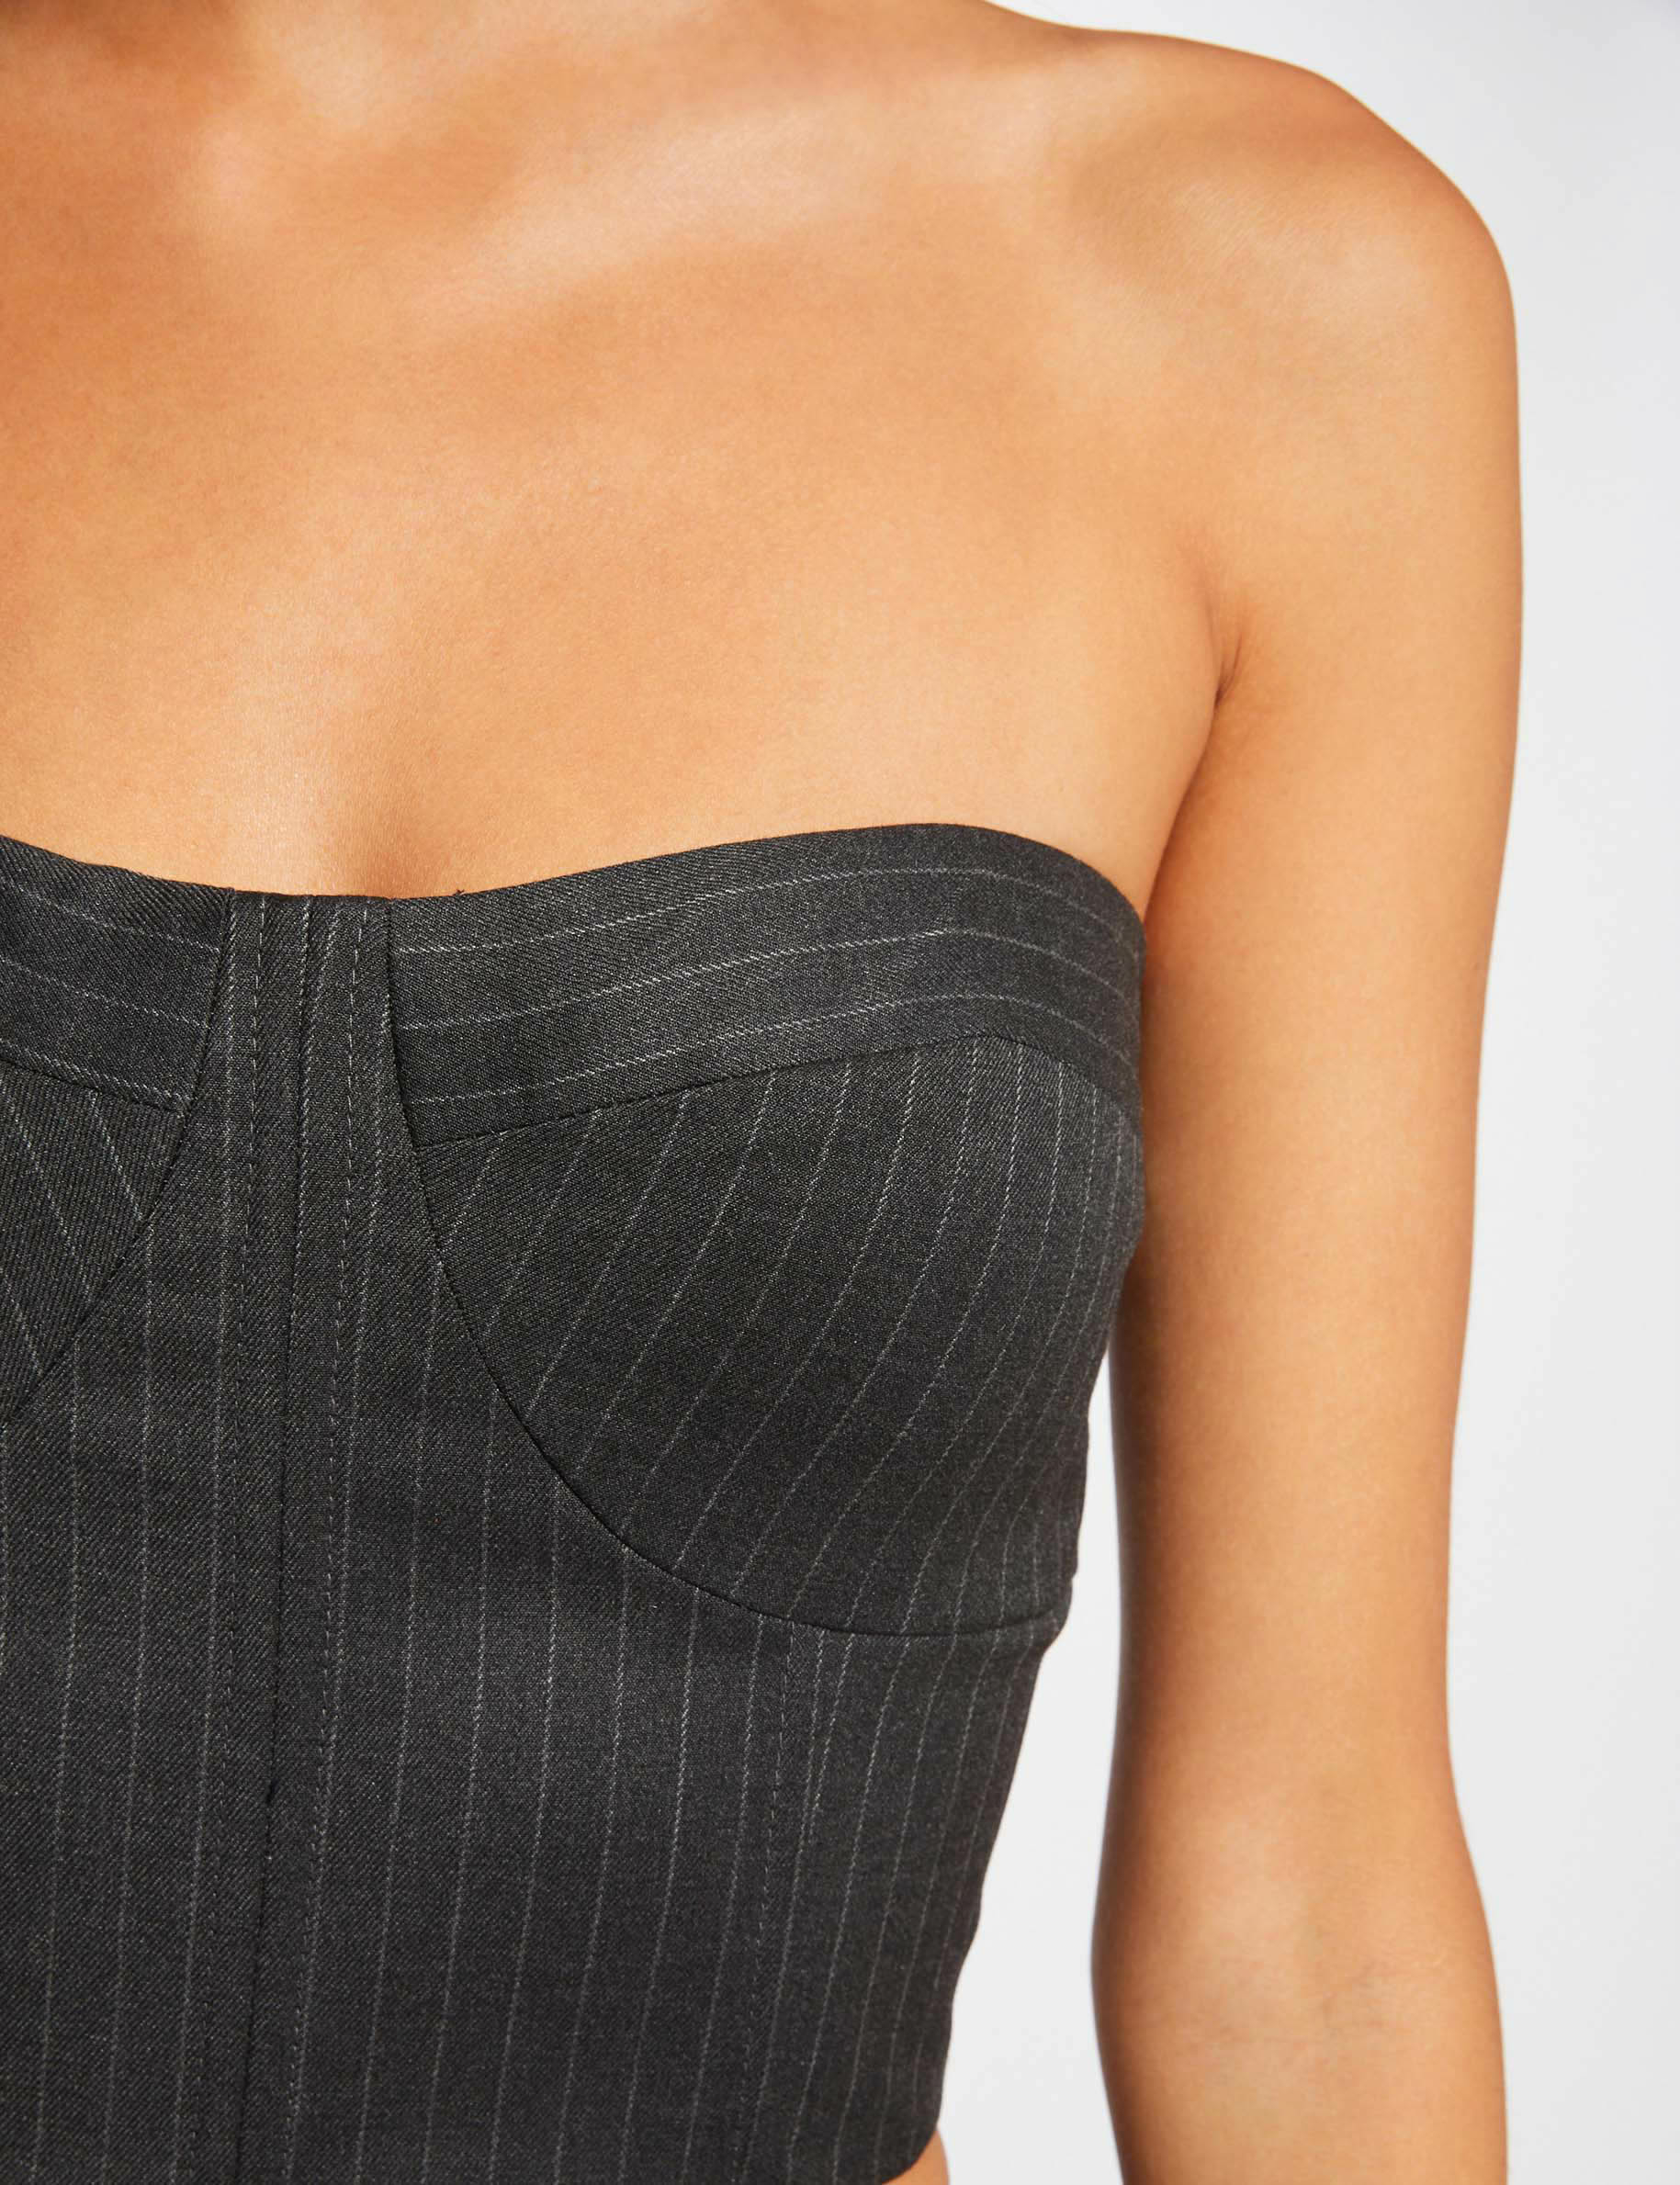 Sleveless bustier with stripes anthracite grey ladies'